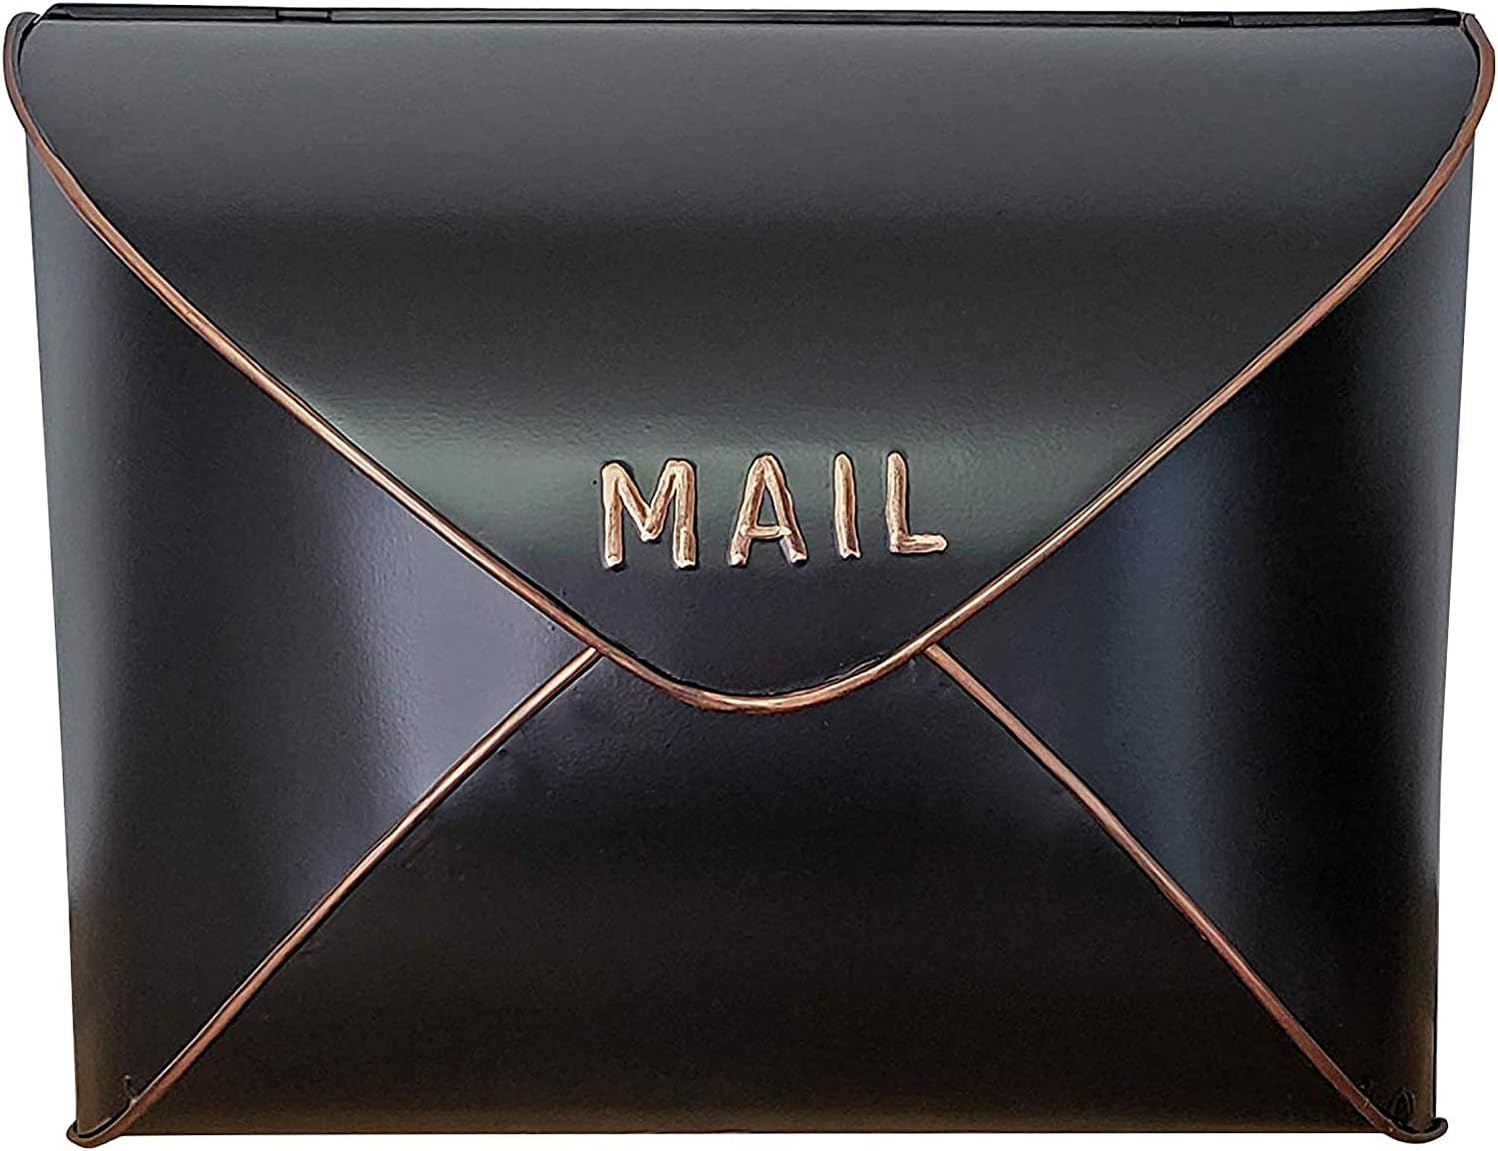 NACH MB-6941 Envelope Wall Mounted Metal Mailbox, Maximum Rust Protection, Black and Copper, 12.5x5x10 Inches, Hardware Included